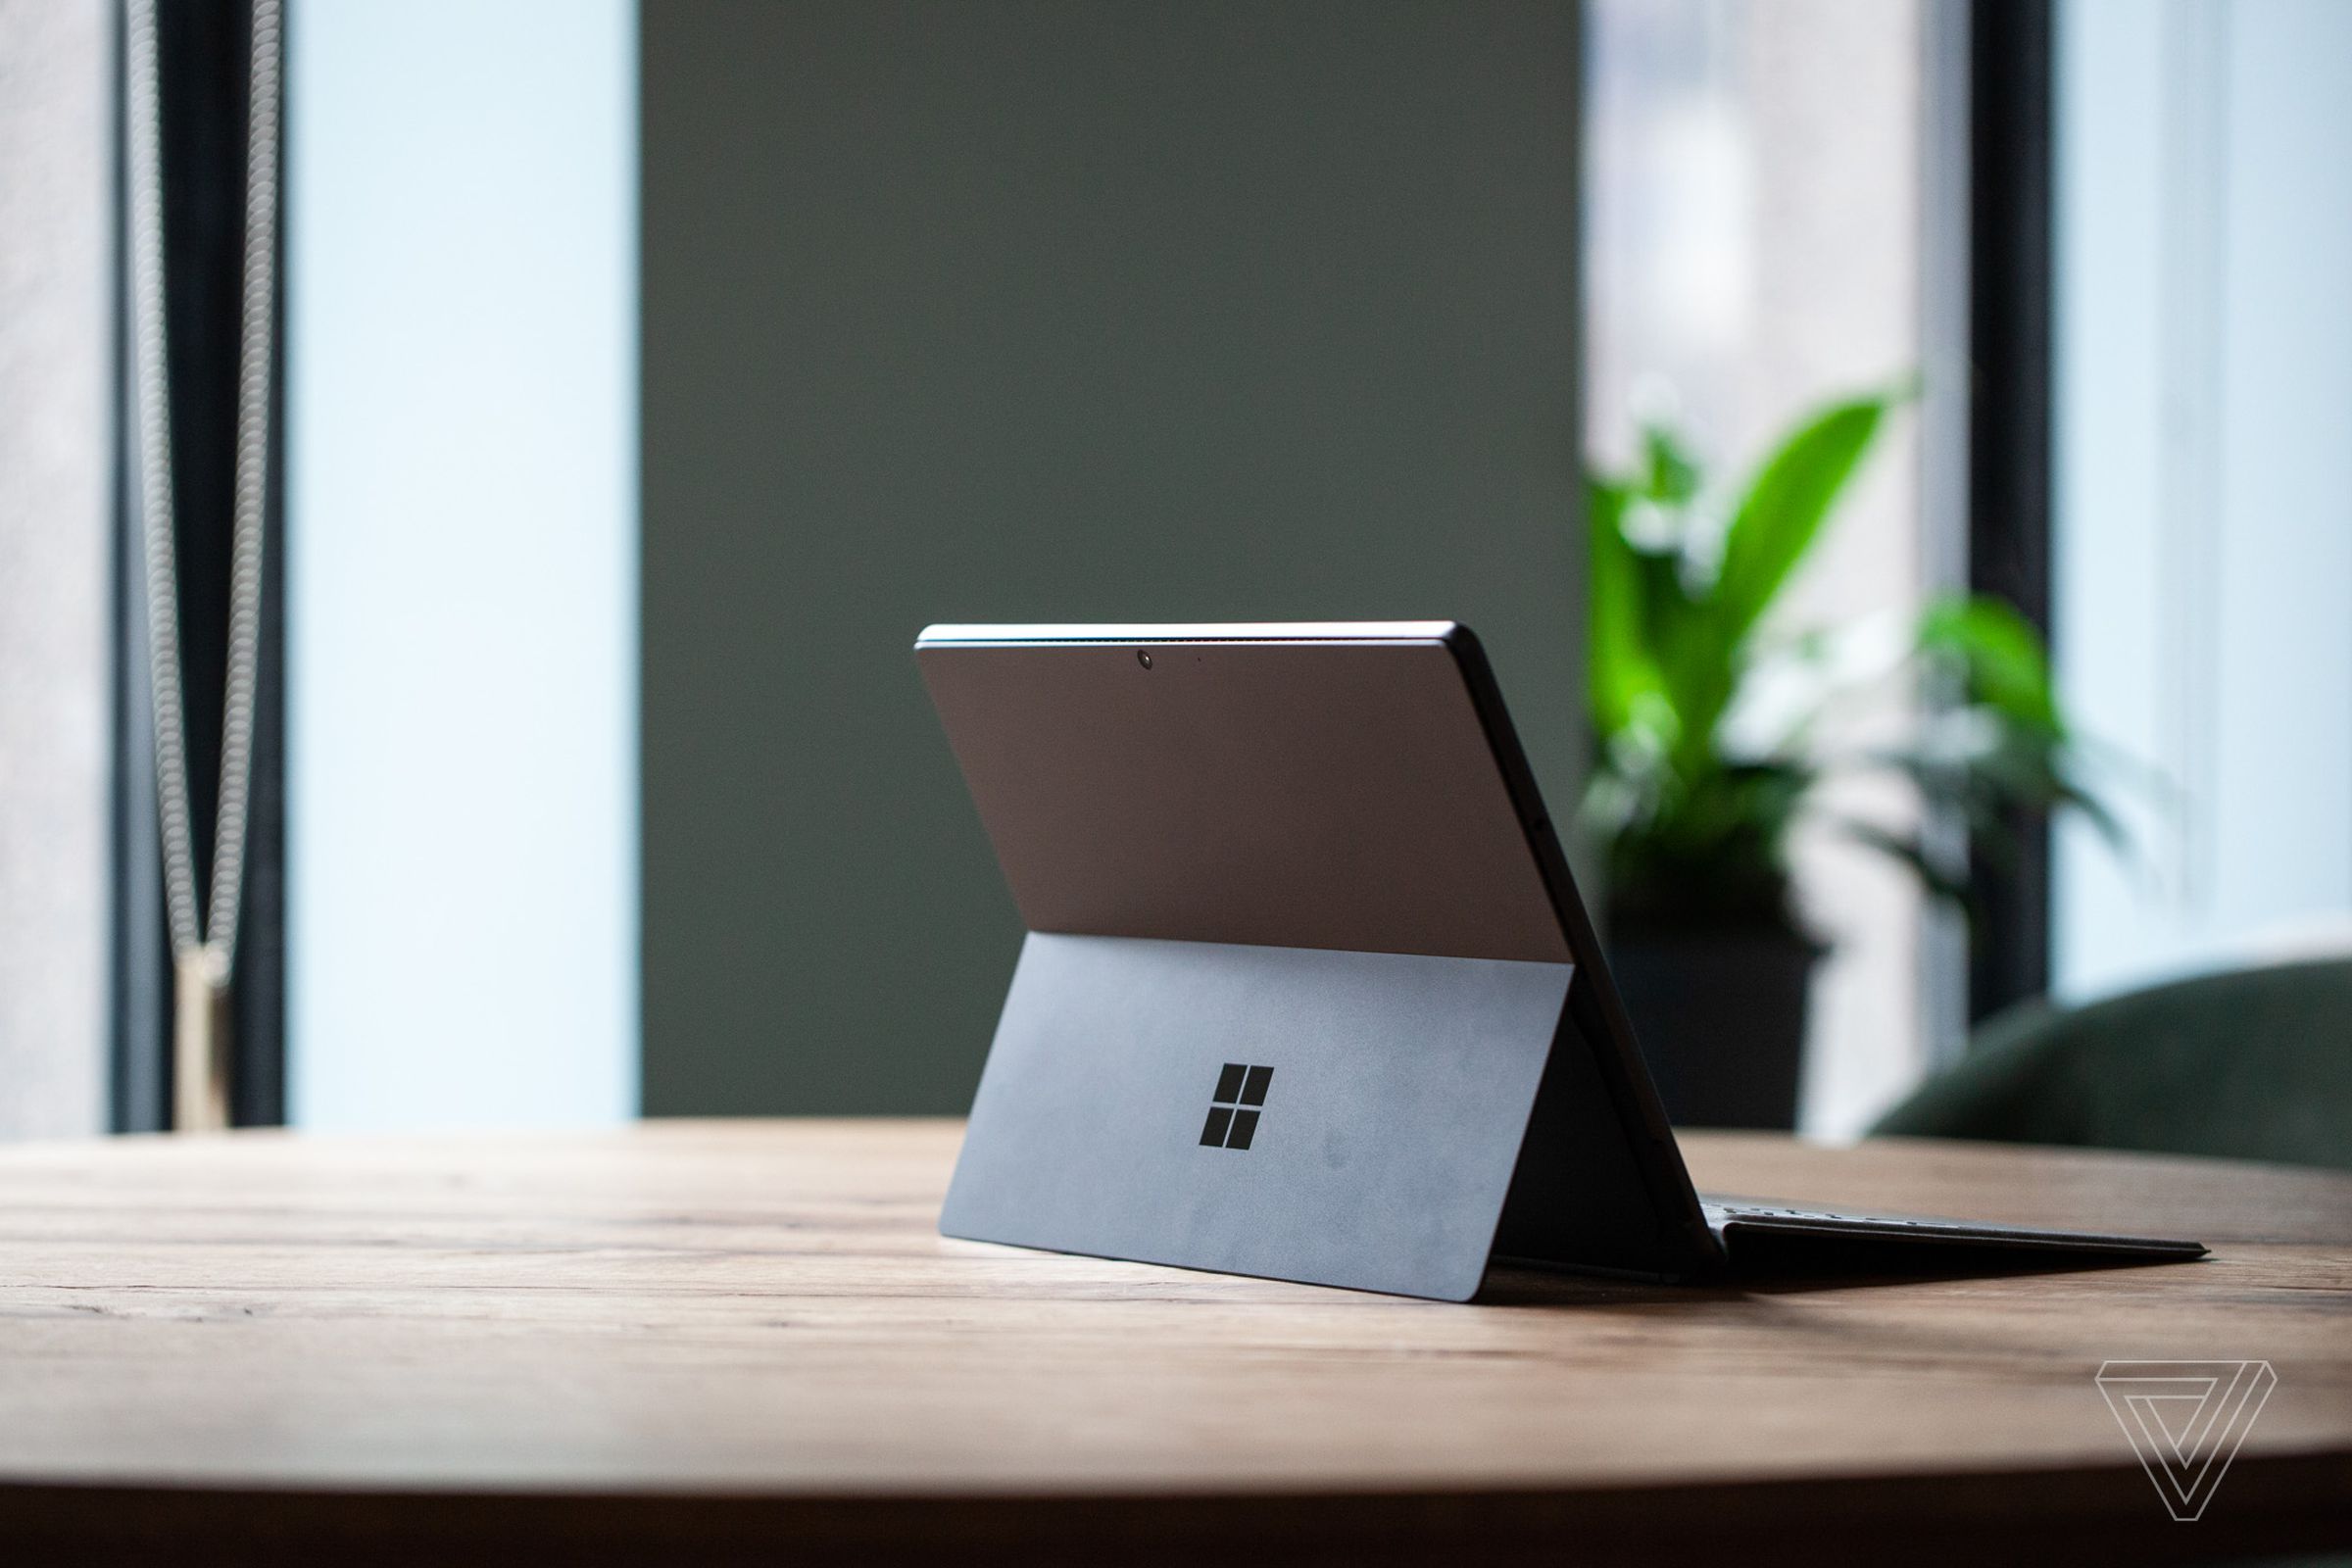 The Surface Pro 8 on a table seen from the back to the right, open, with the Signature Keyboard attached and the kickstand out. In the background is a green wall and a potted plant.